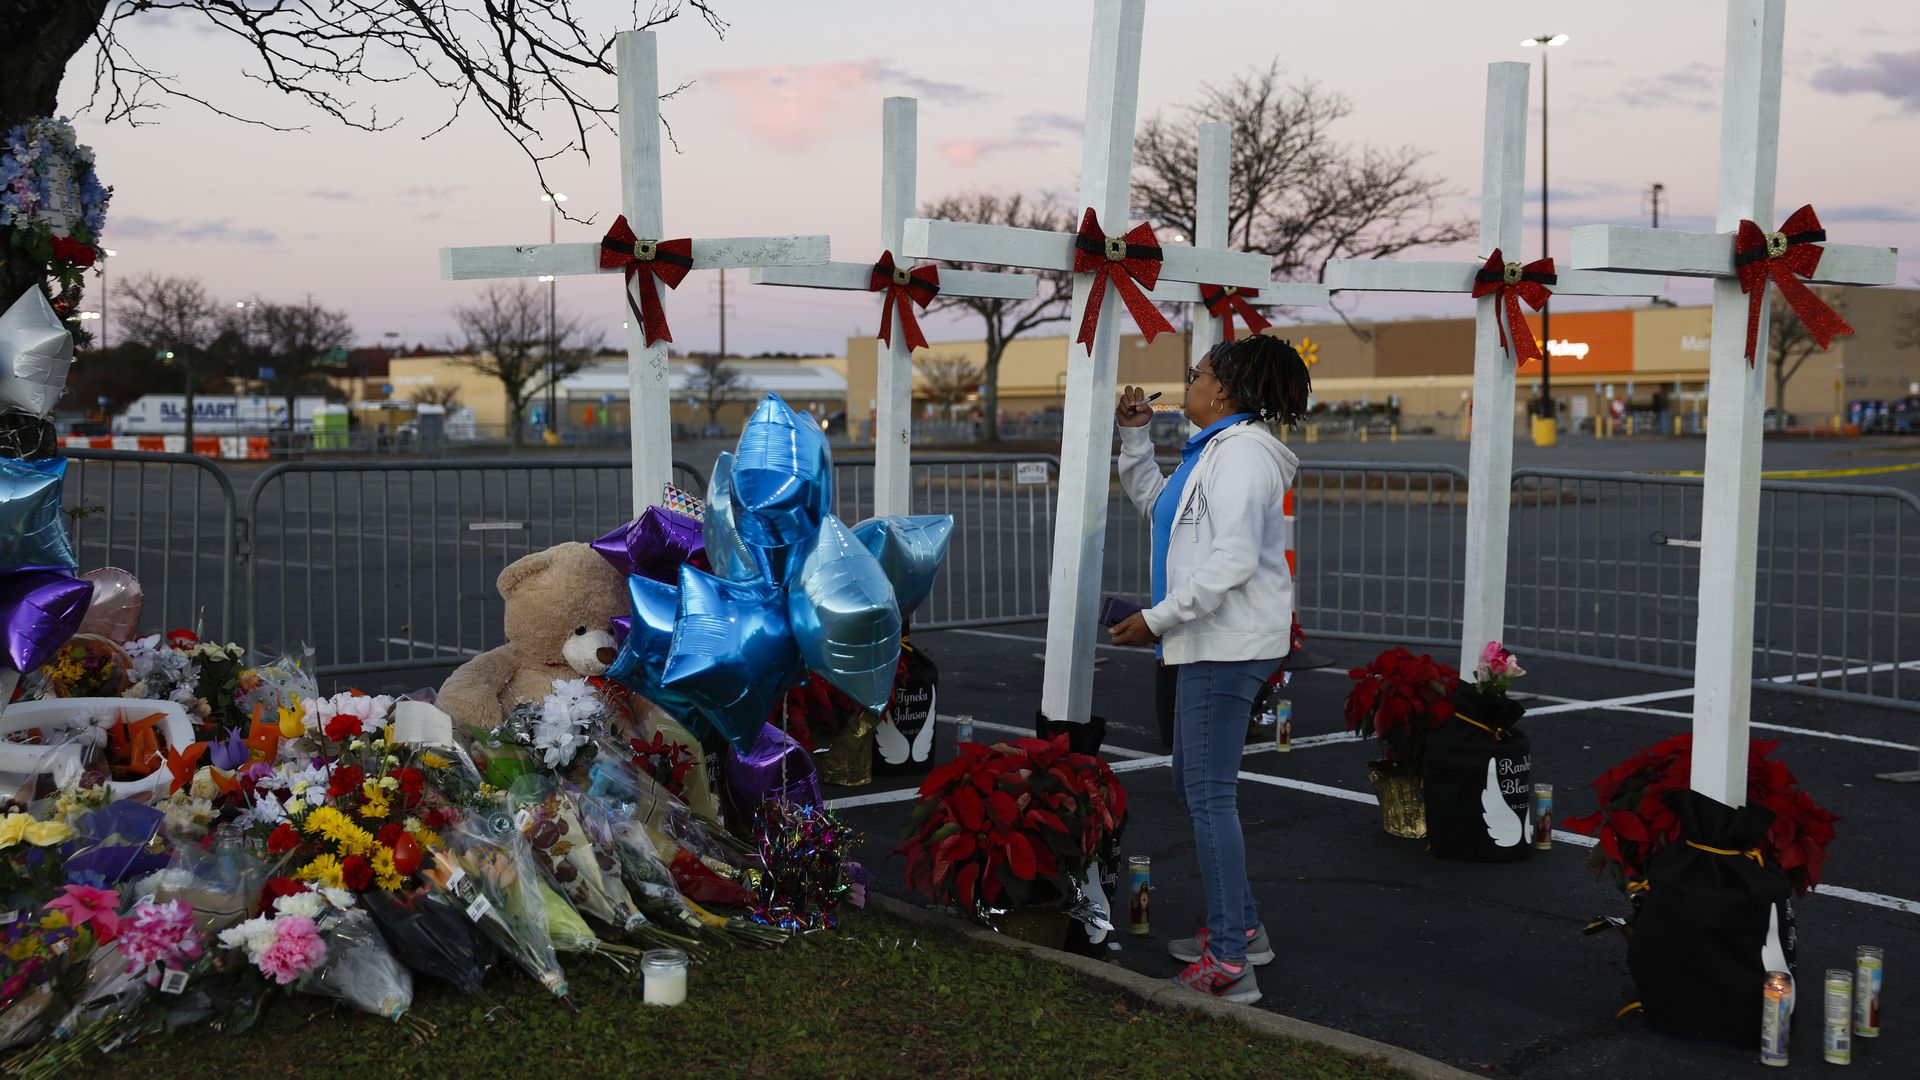 A person tending to a memorial outside the Walmart in Chesapeake, Virginia, on Nov. 28.